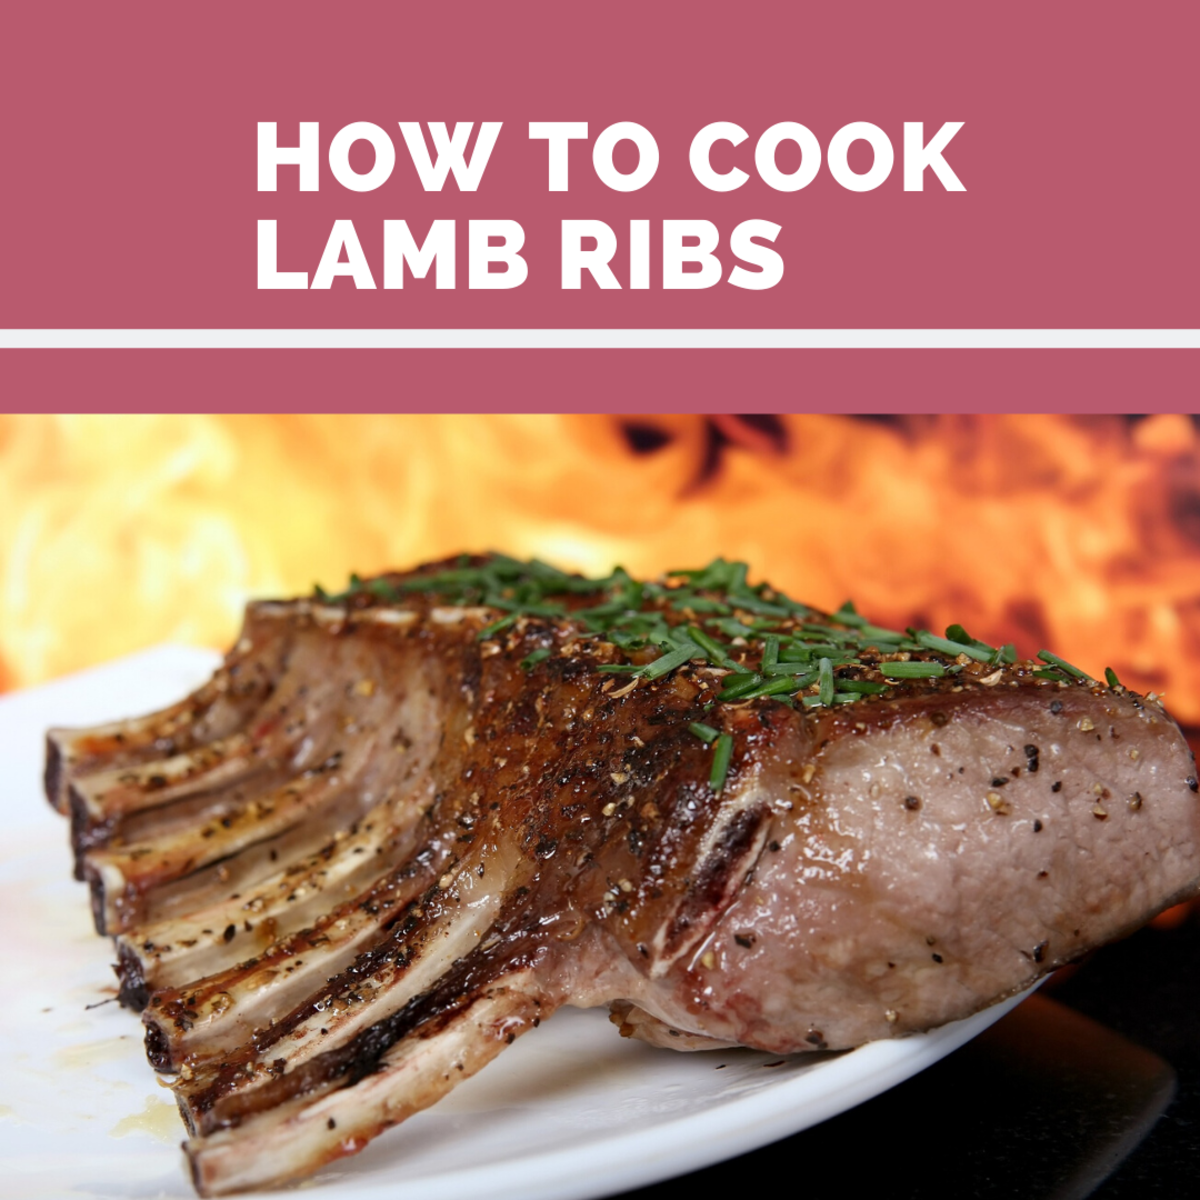 Lamb is a great source of protein. Read on to learn how to cook lamb ribs to perfection.